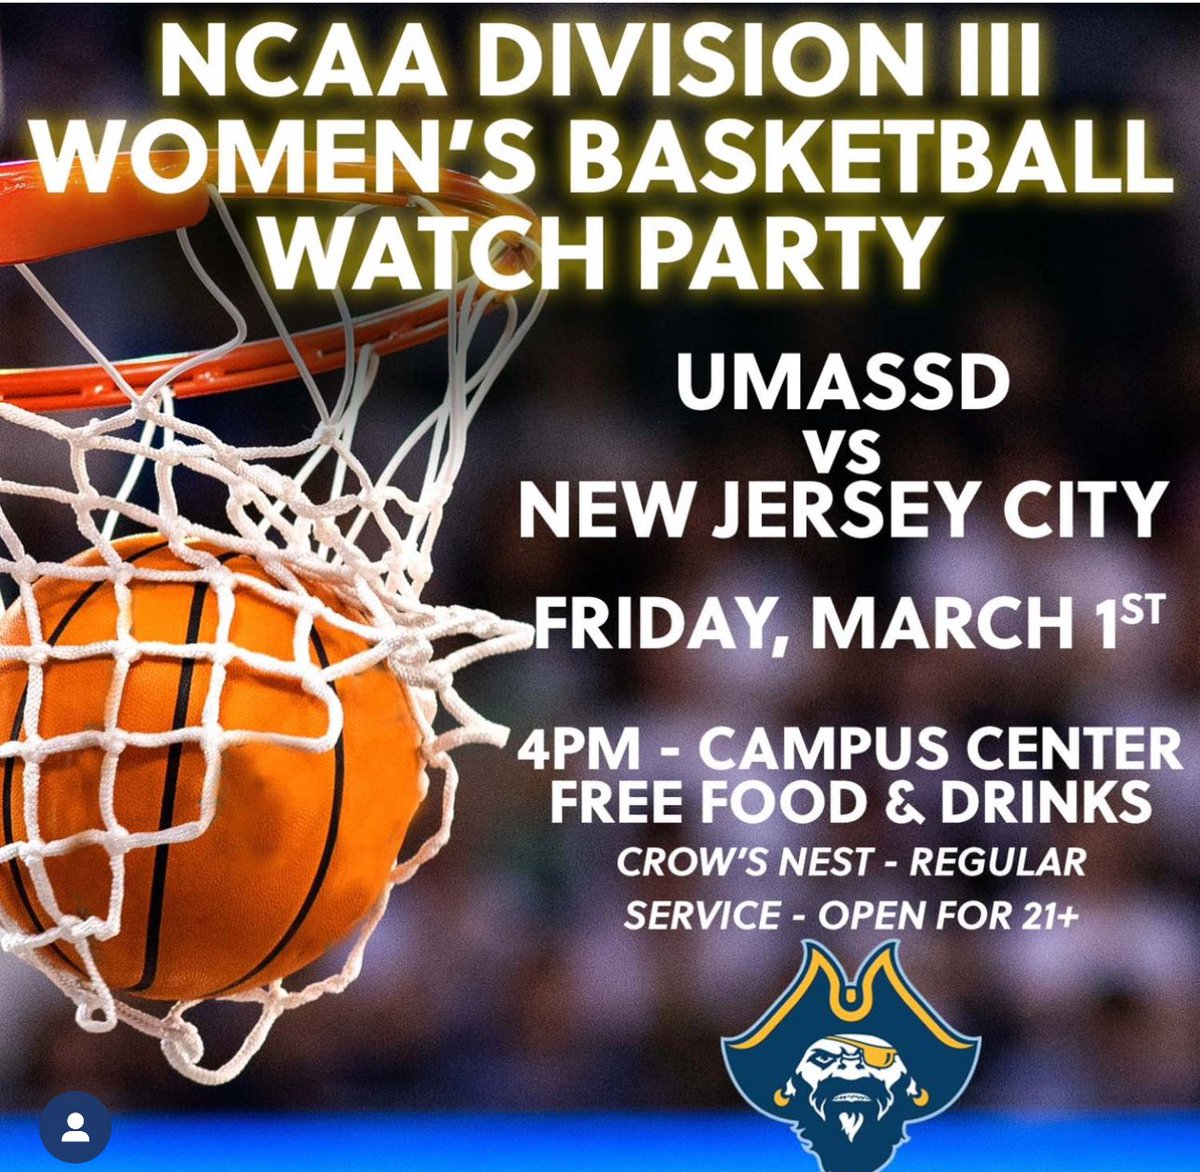 Let’s get this party started!! Support UMASSD Women’s Basketball as they compete in the NCAA Division III tournament on Friday at The Crows Nest. #ncaawomensbasketball #ncaa #proudtobeUMassd